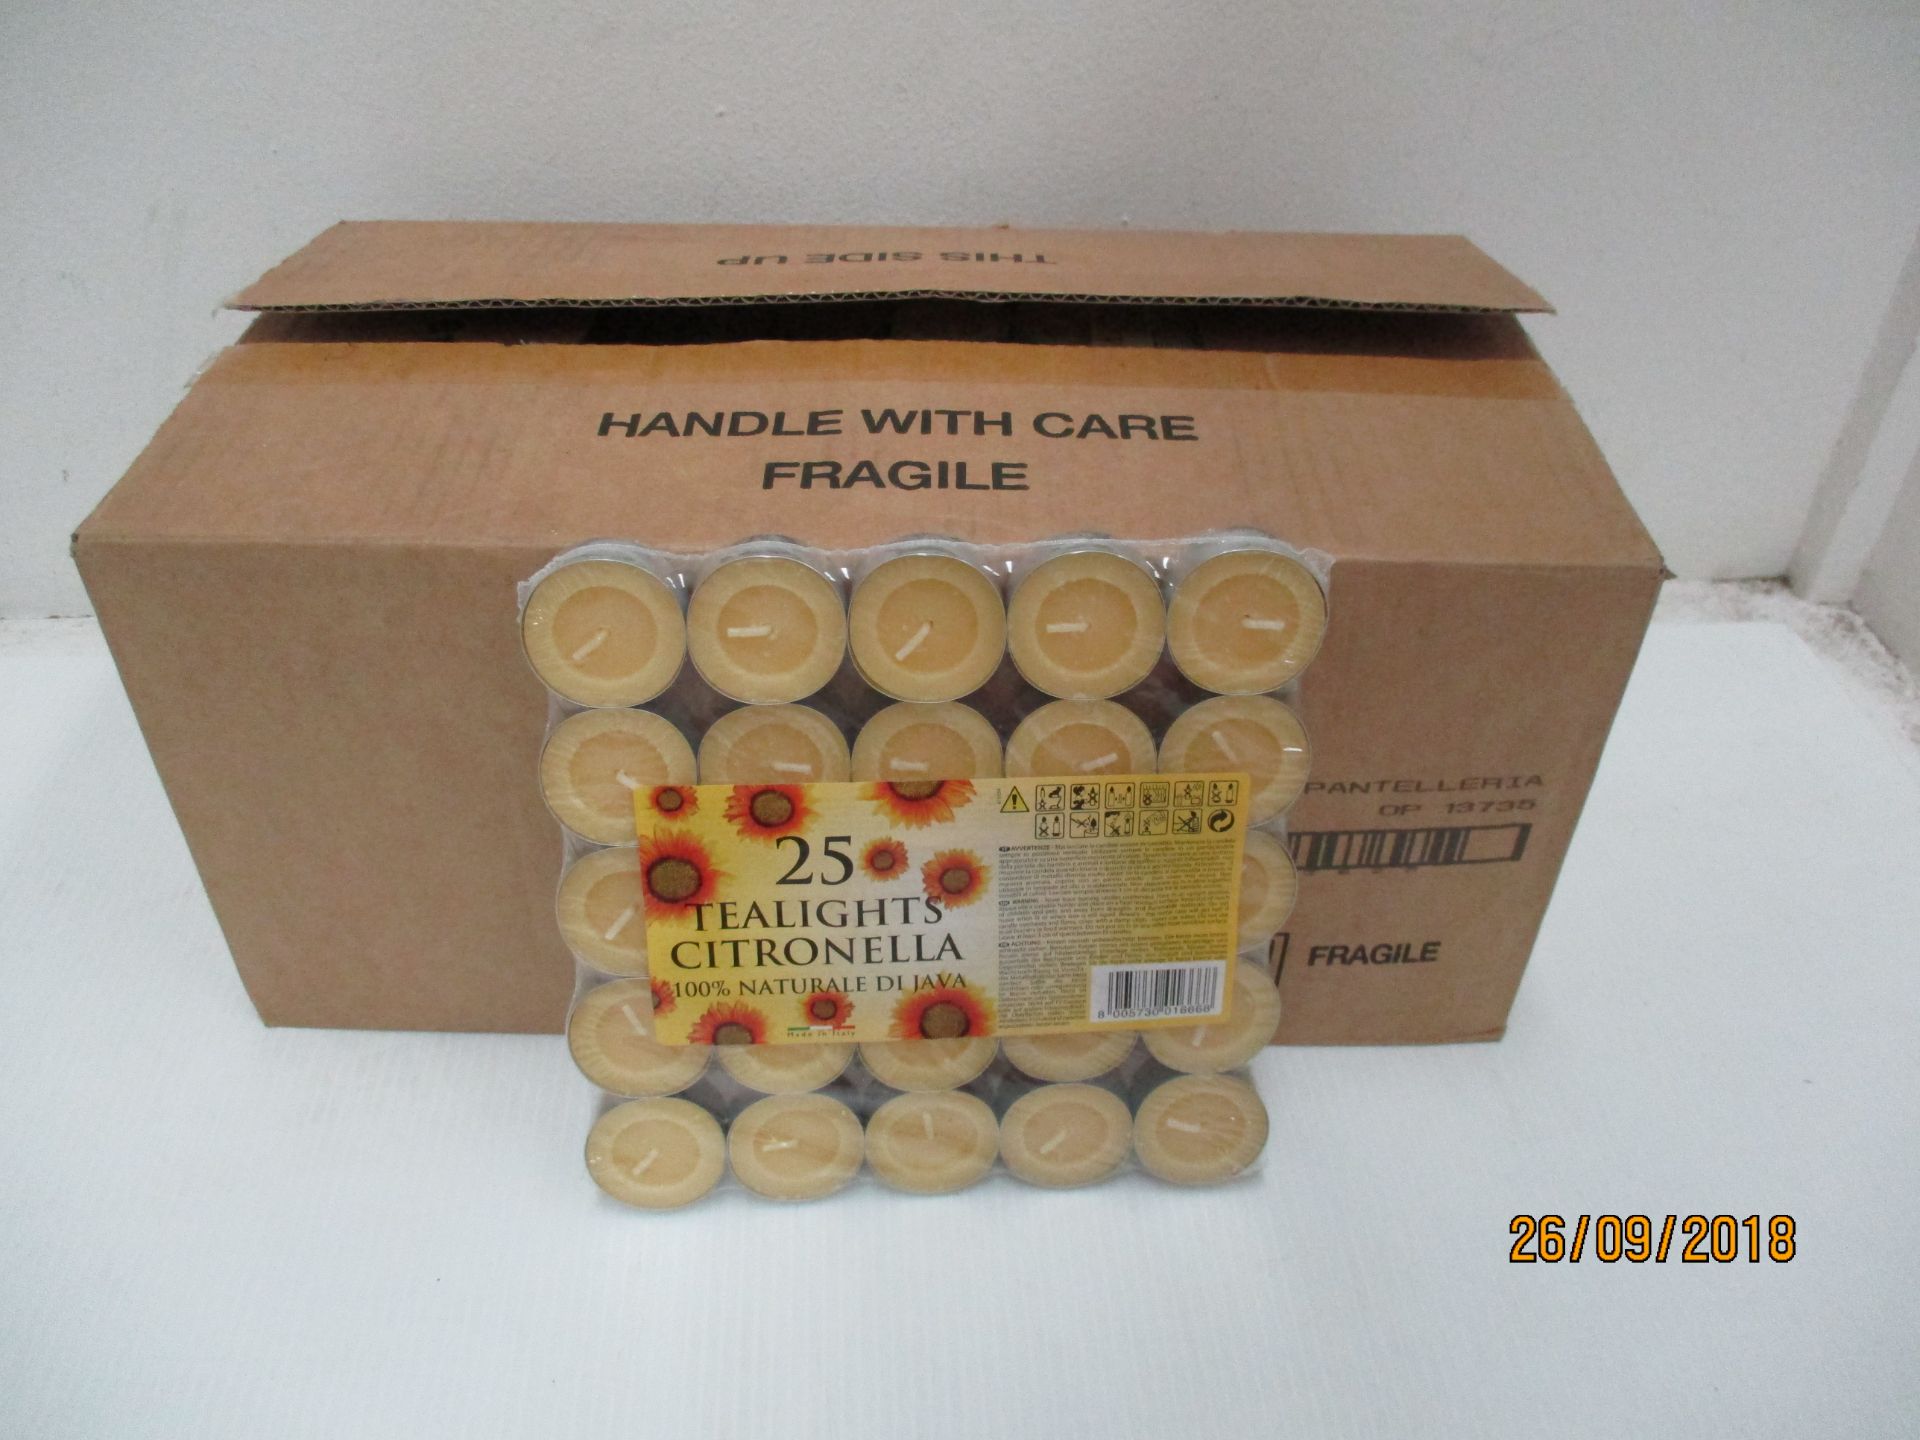 20 x packs of 25 100% Naturale Di Java citronella tealights (1 outer box)